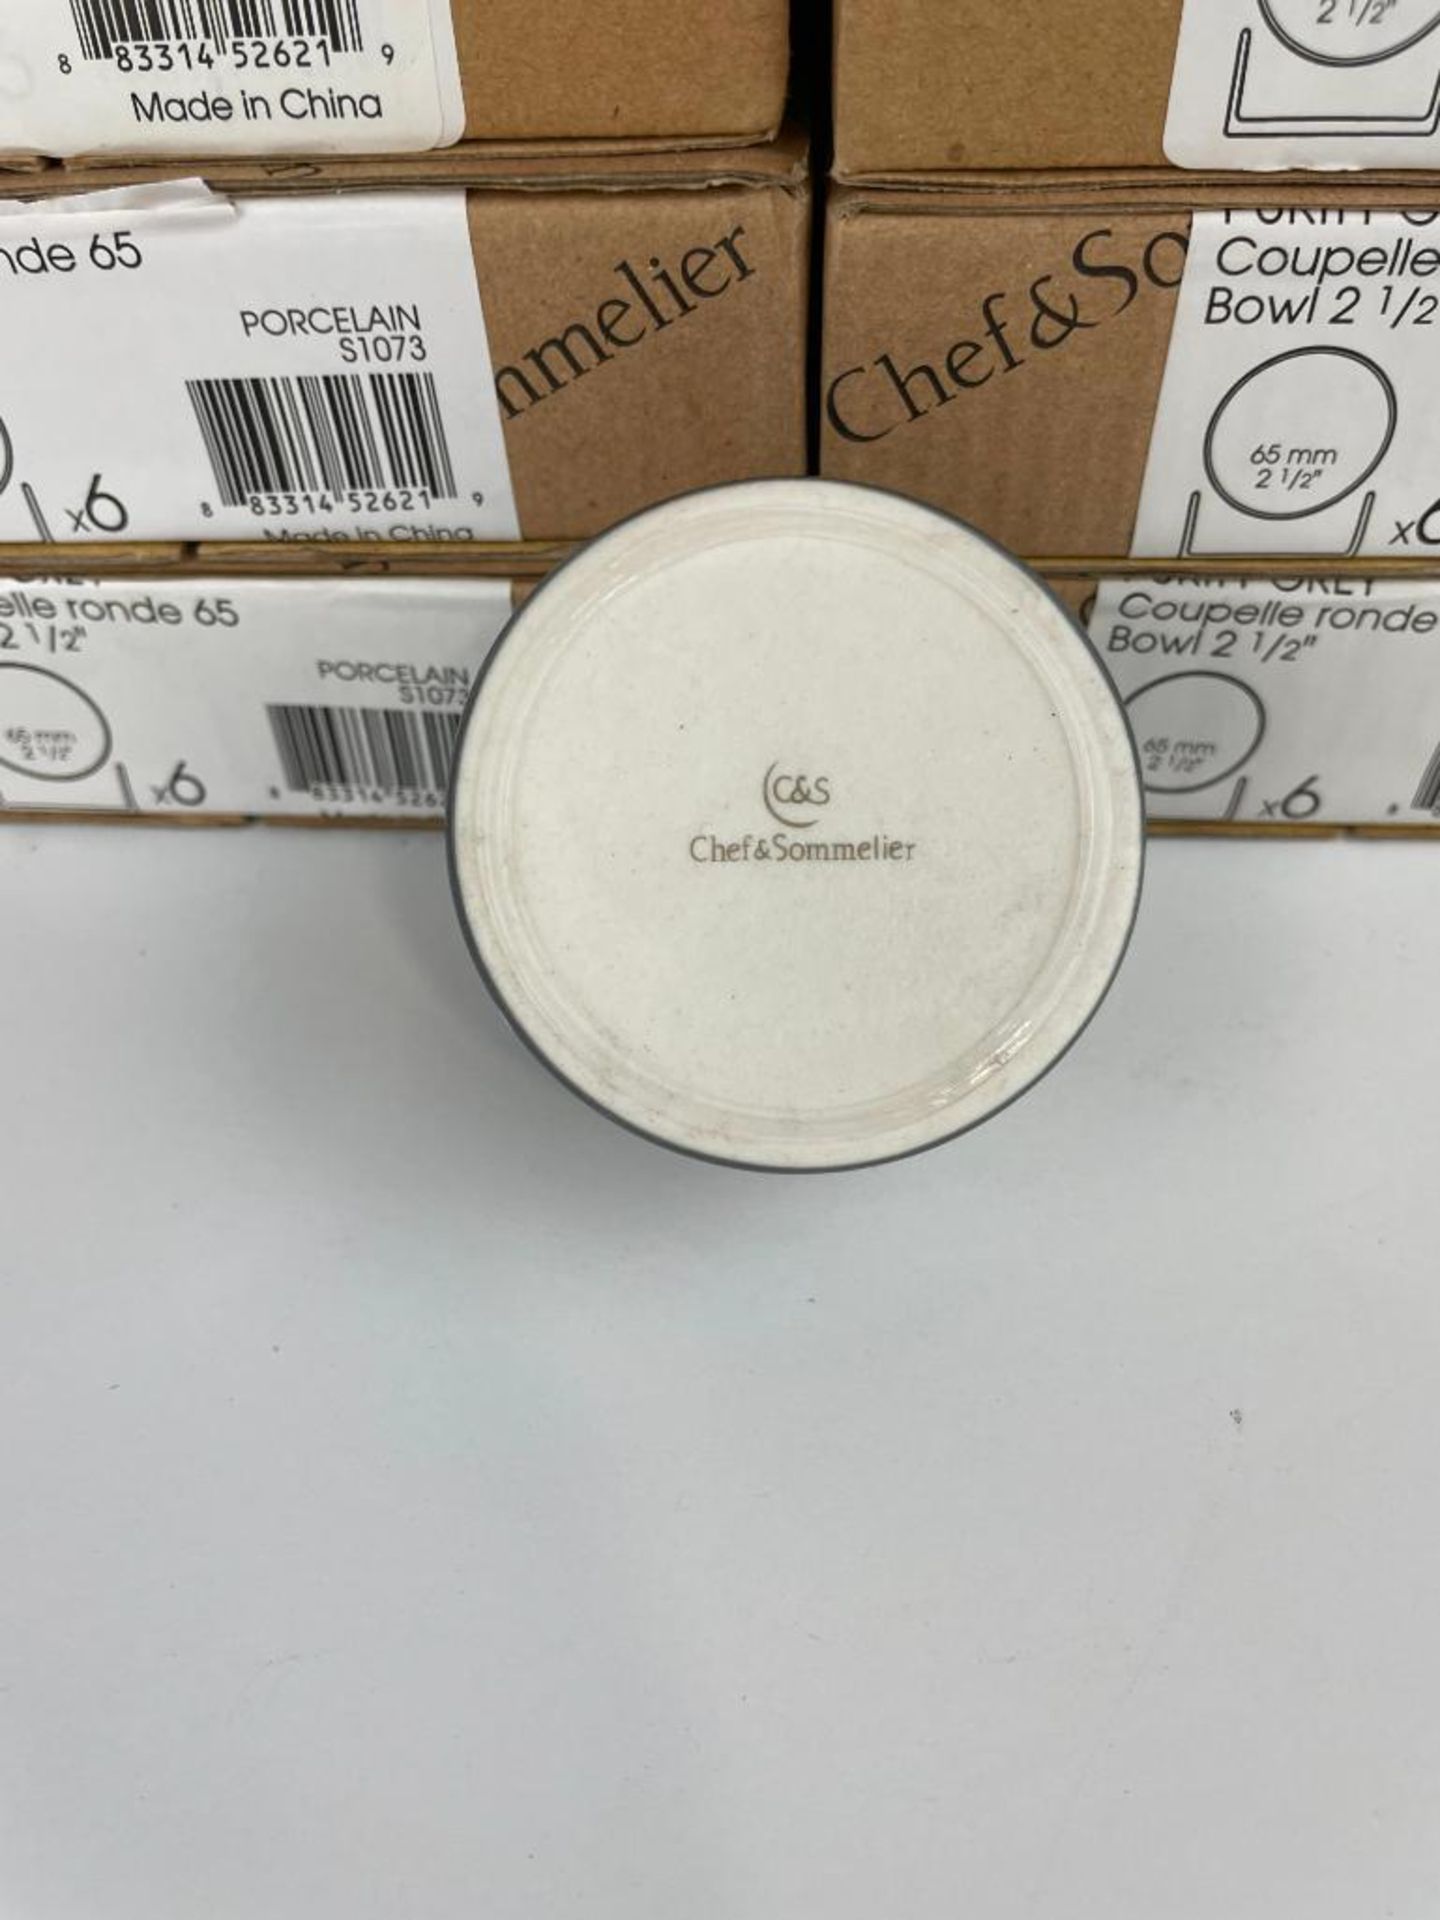 2 CASES OF CHEF & SOMMELIER PURITY 2 OZ. GREY CIRCULAR BOWLS, 24/CASE - NEW - Image 4 of 6